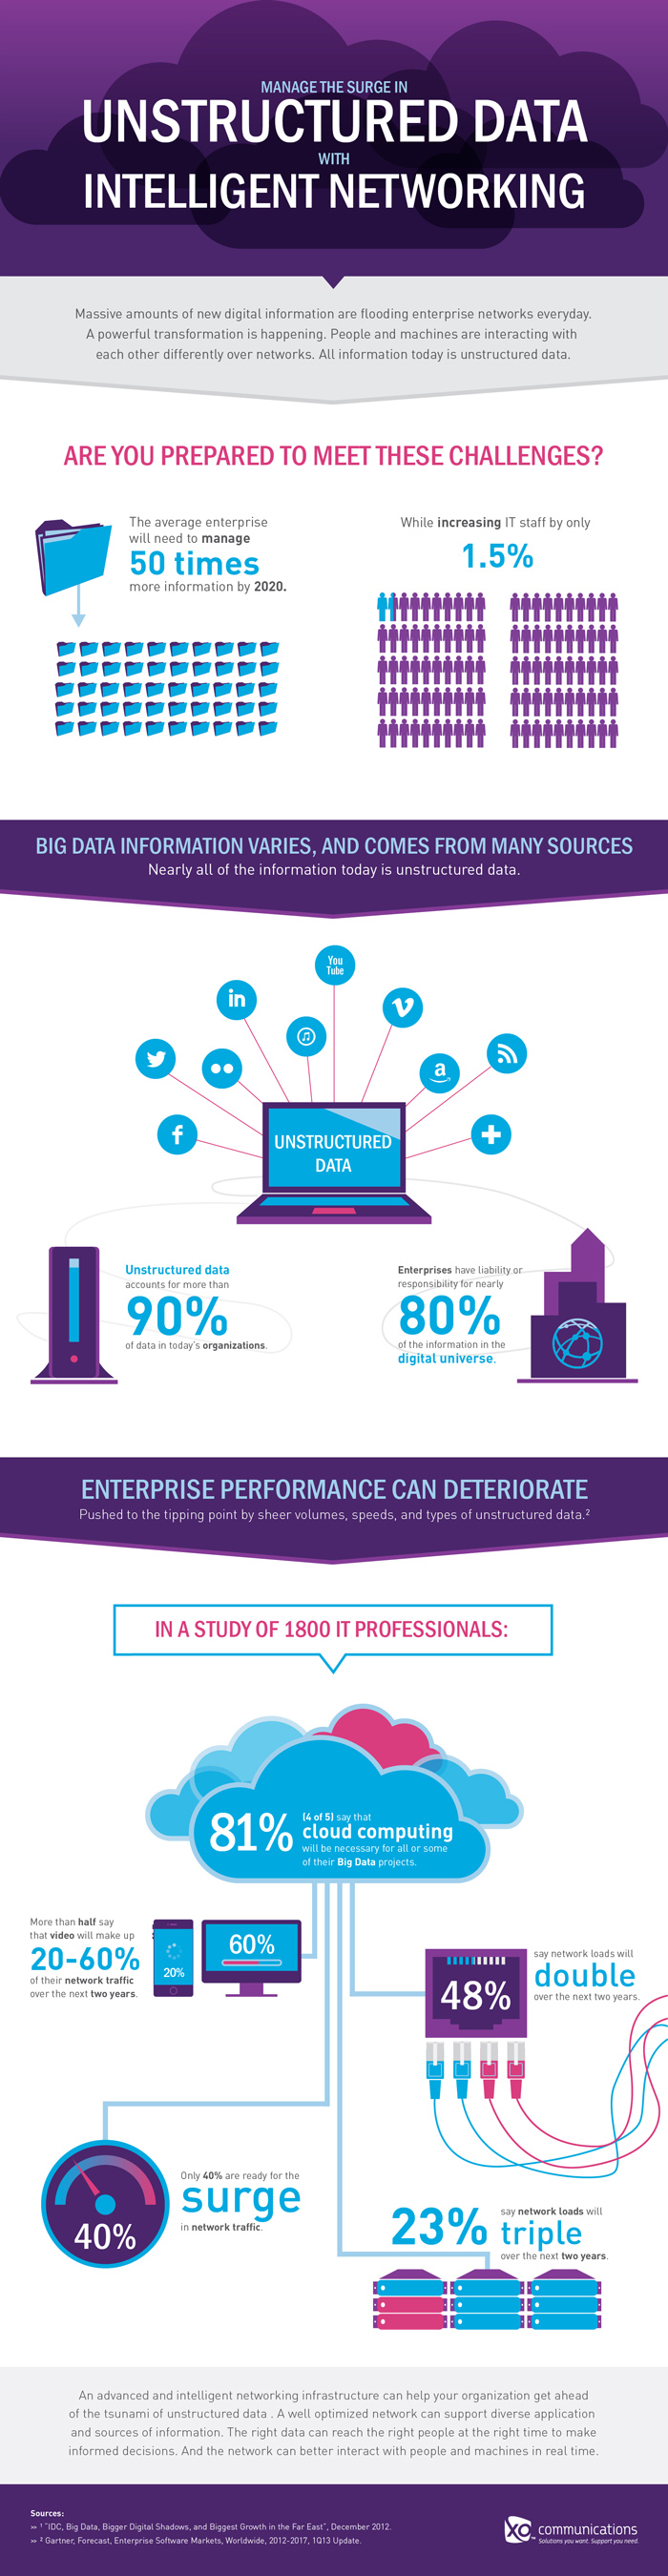 Unstructured Data - Manage the Surge